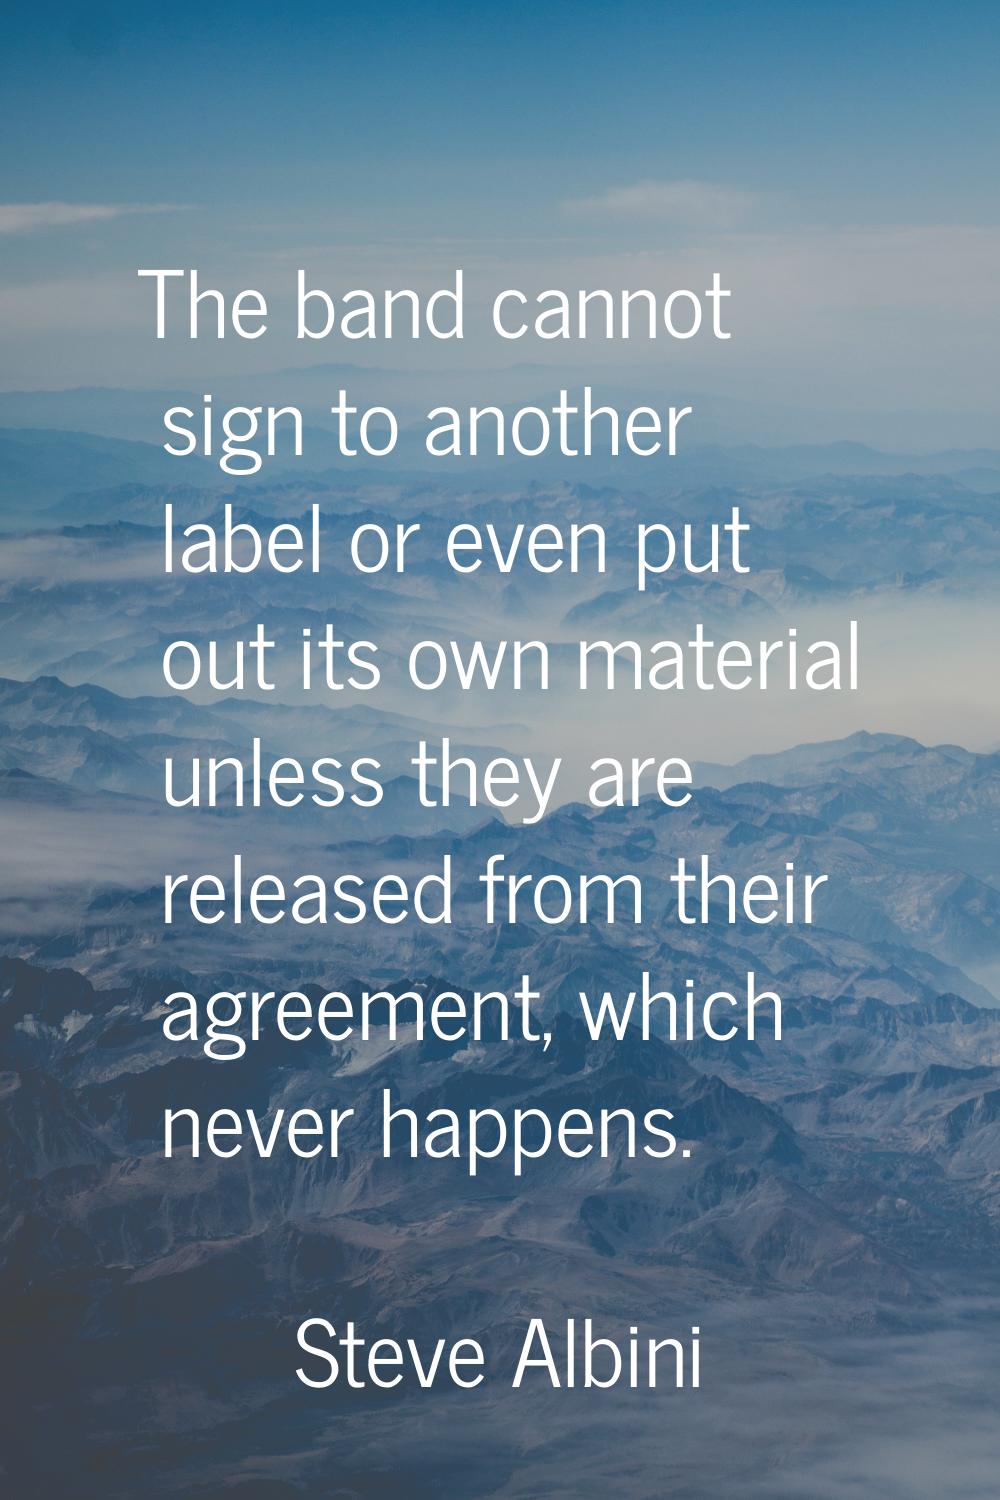 The band cannot sign to another label or even put out its own material unless they are released fro